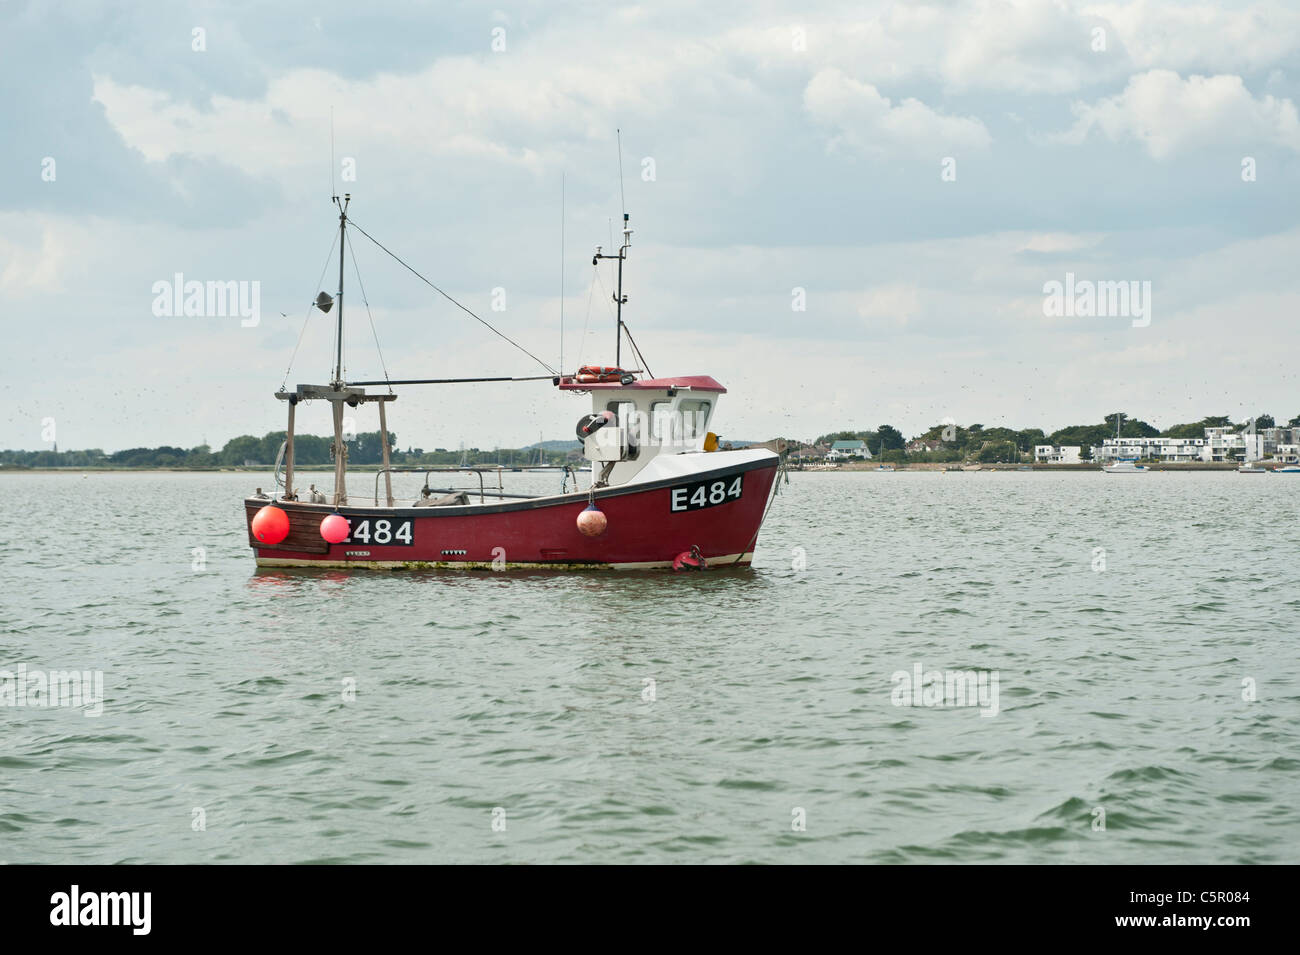 A fishing trawler boat moored in Christchuch Harbour, Dorset, England, UK. Stock Photo